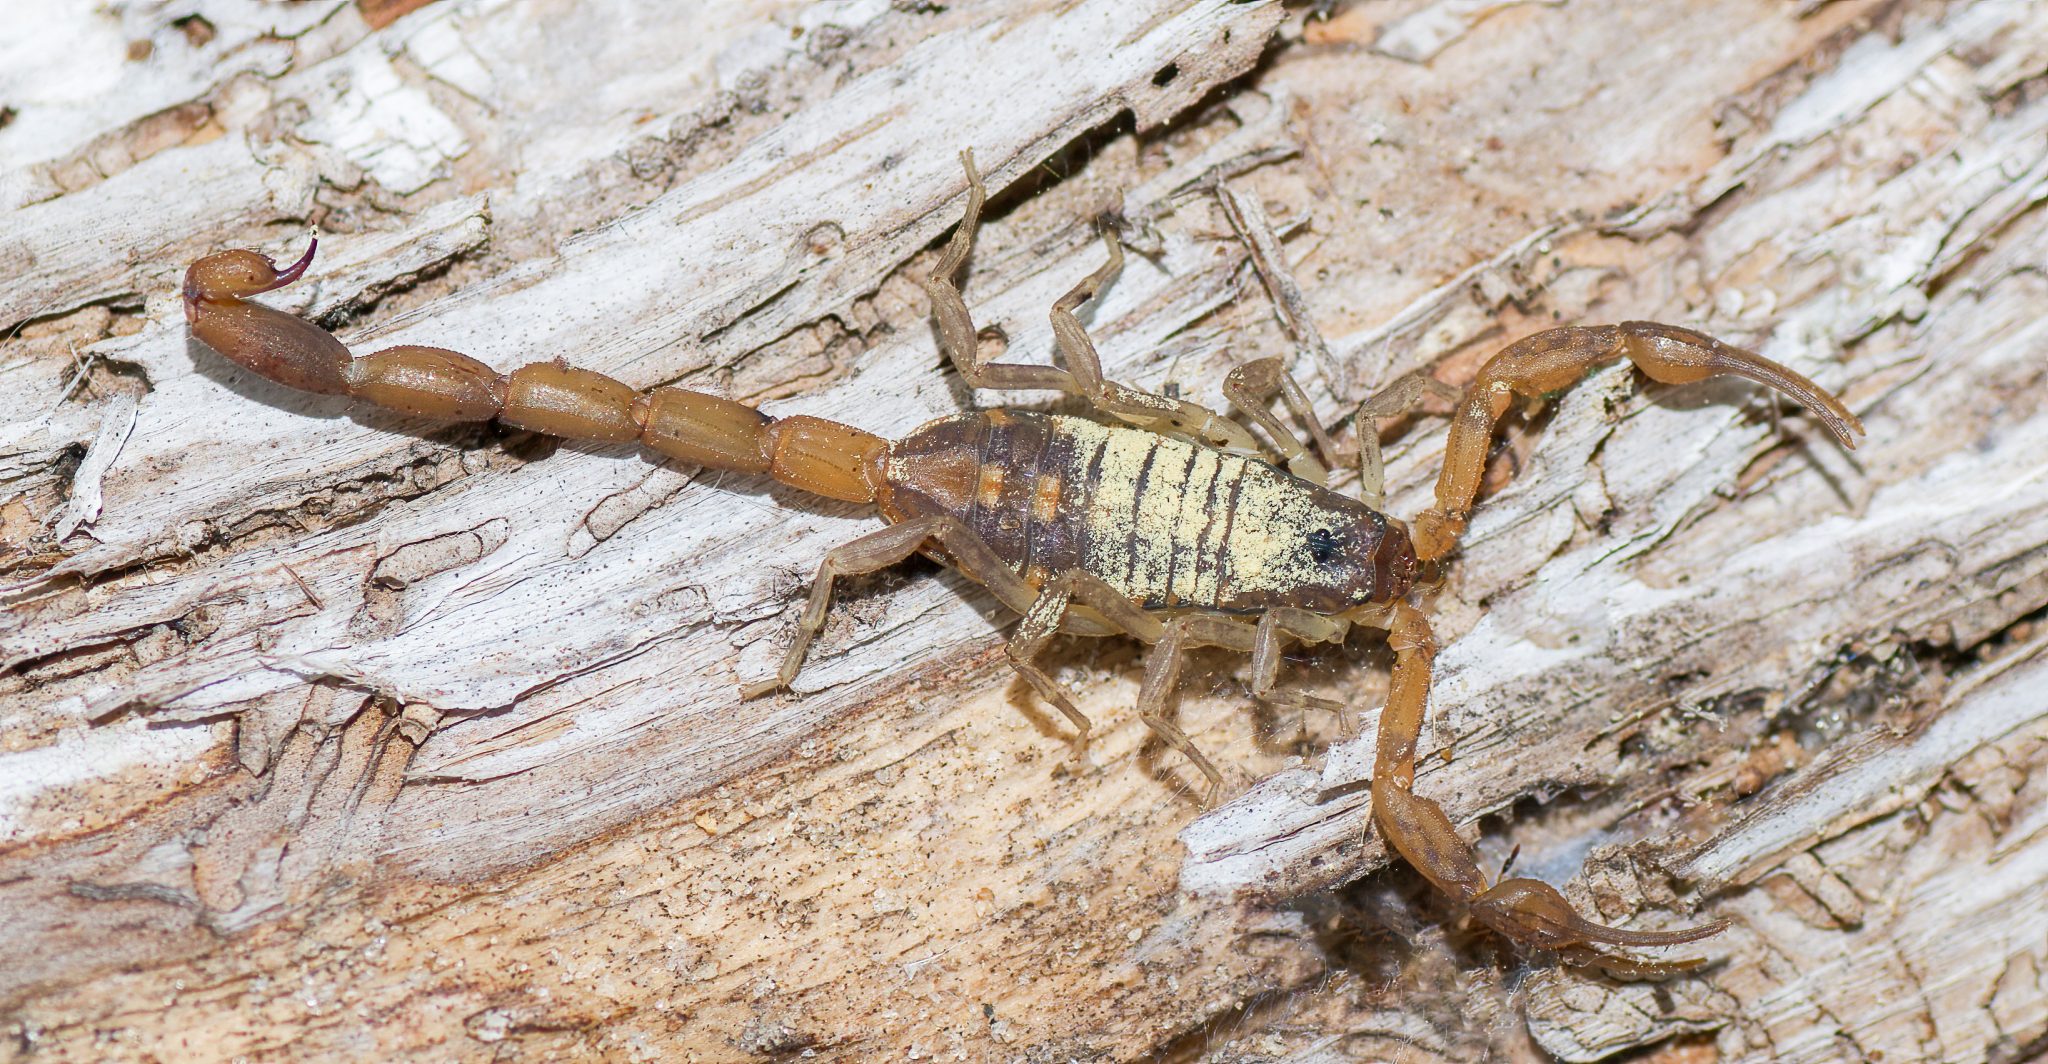 Scorpion Management in Residential Homes - Alabama Cooperative